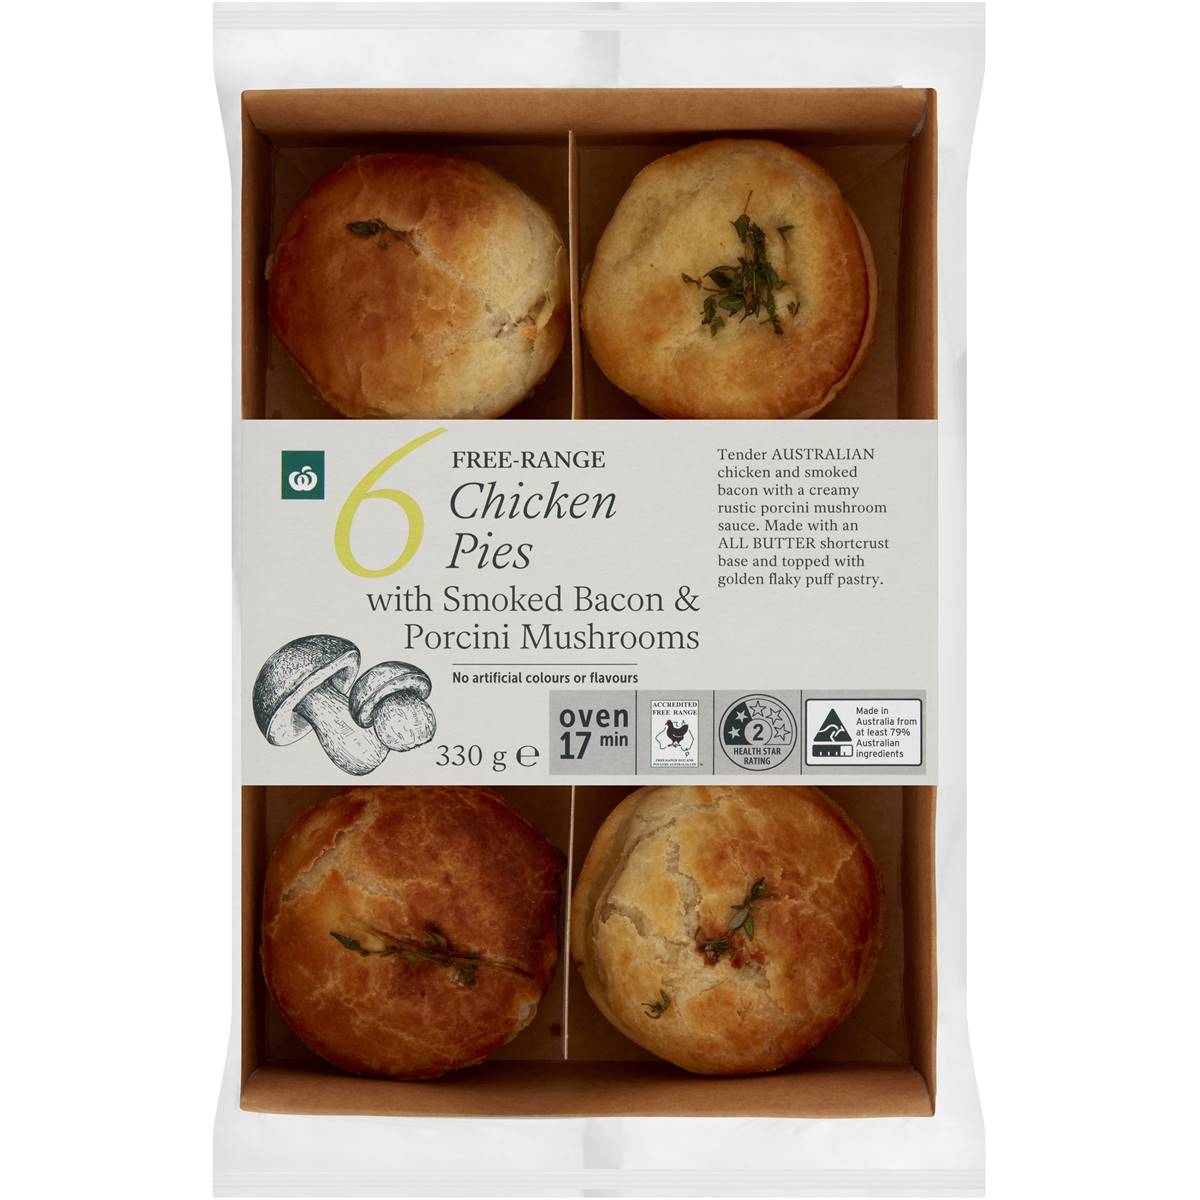 Calories in Woolworths Free Range Chicken Porcini Mushroom & Smoked Bacon Pies